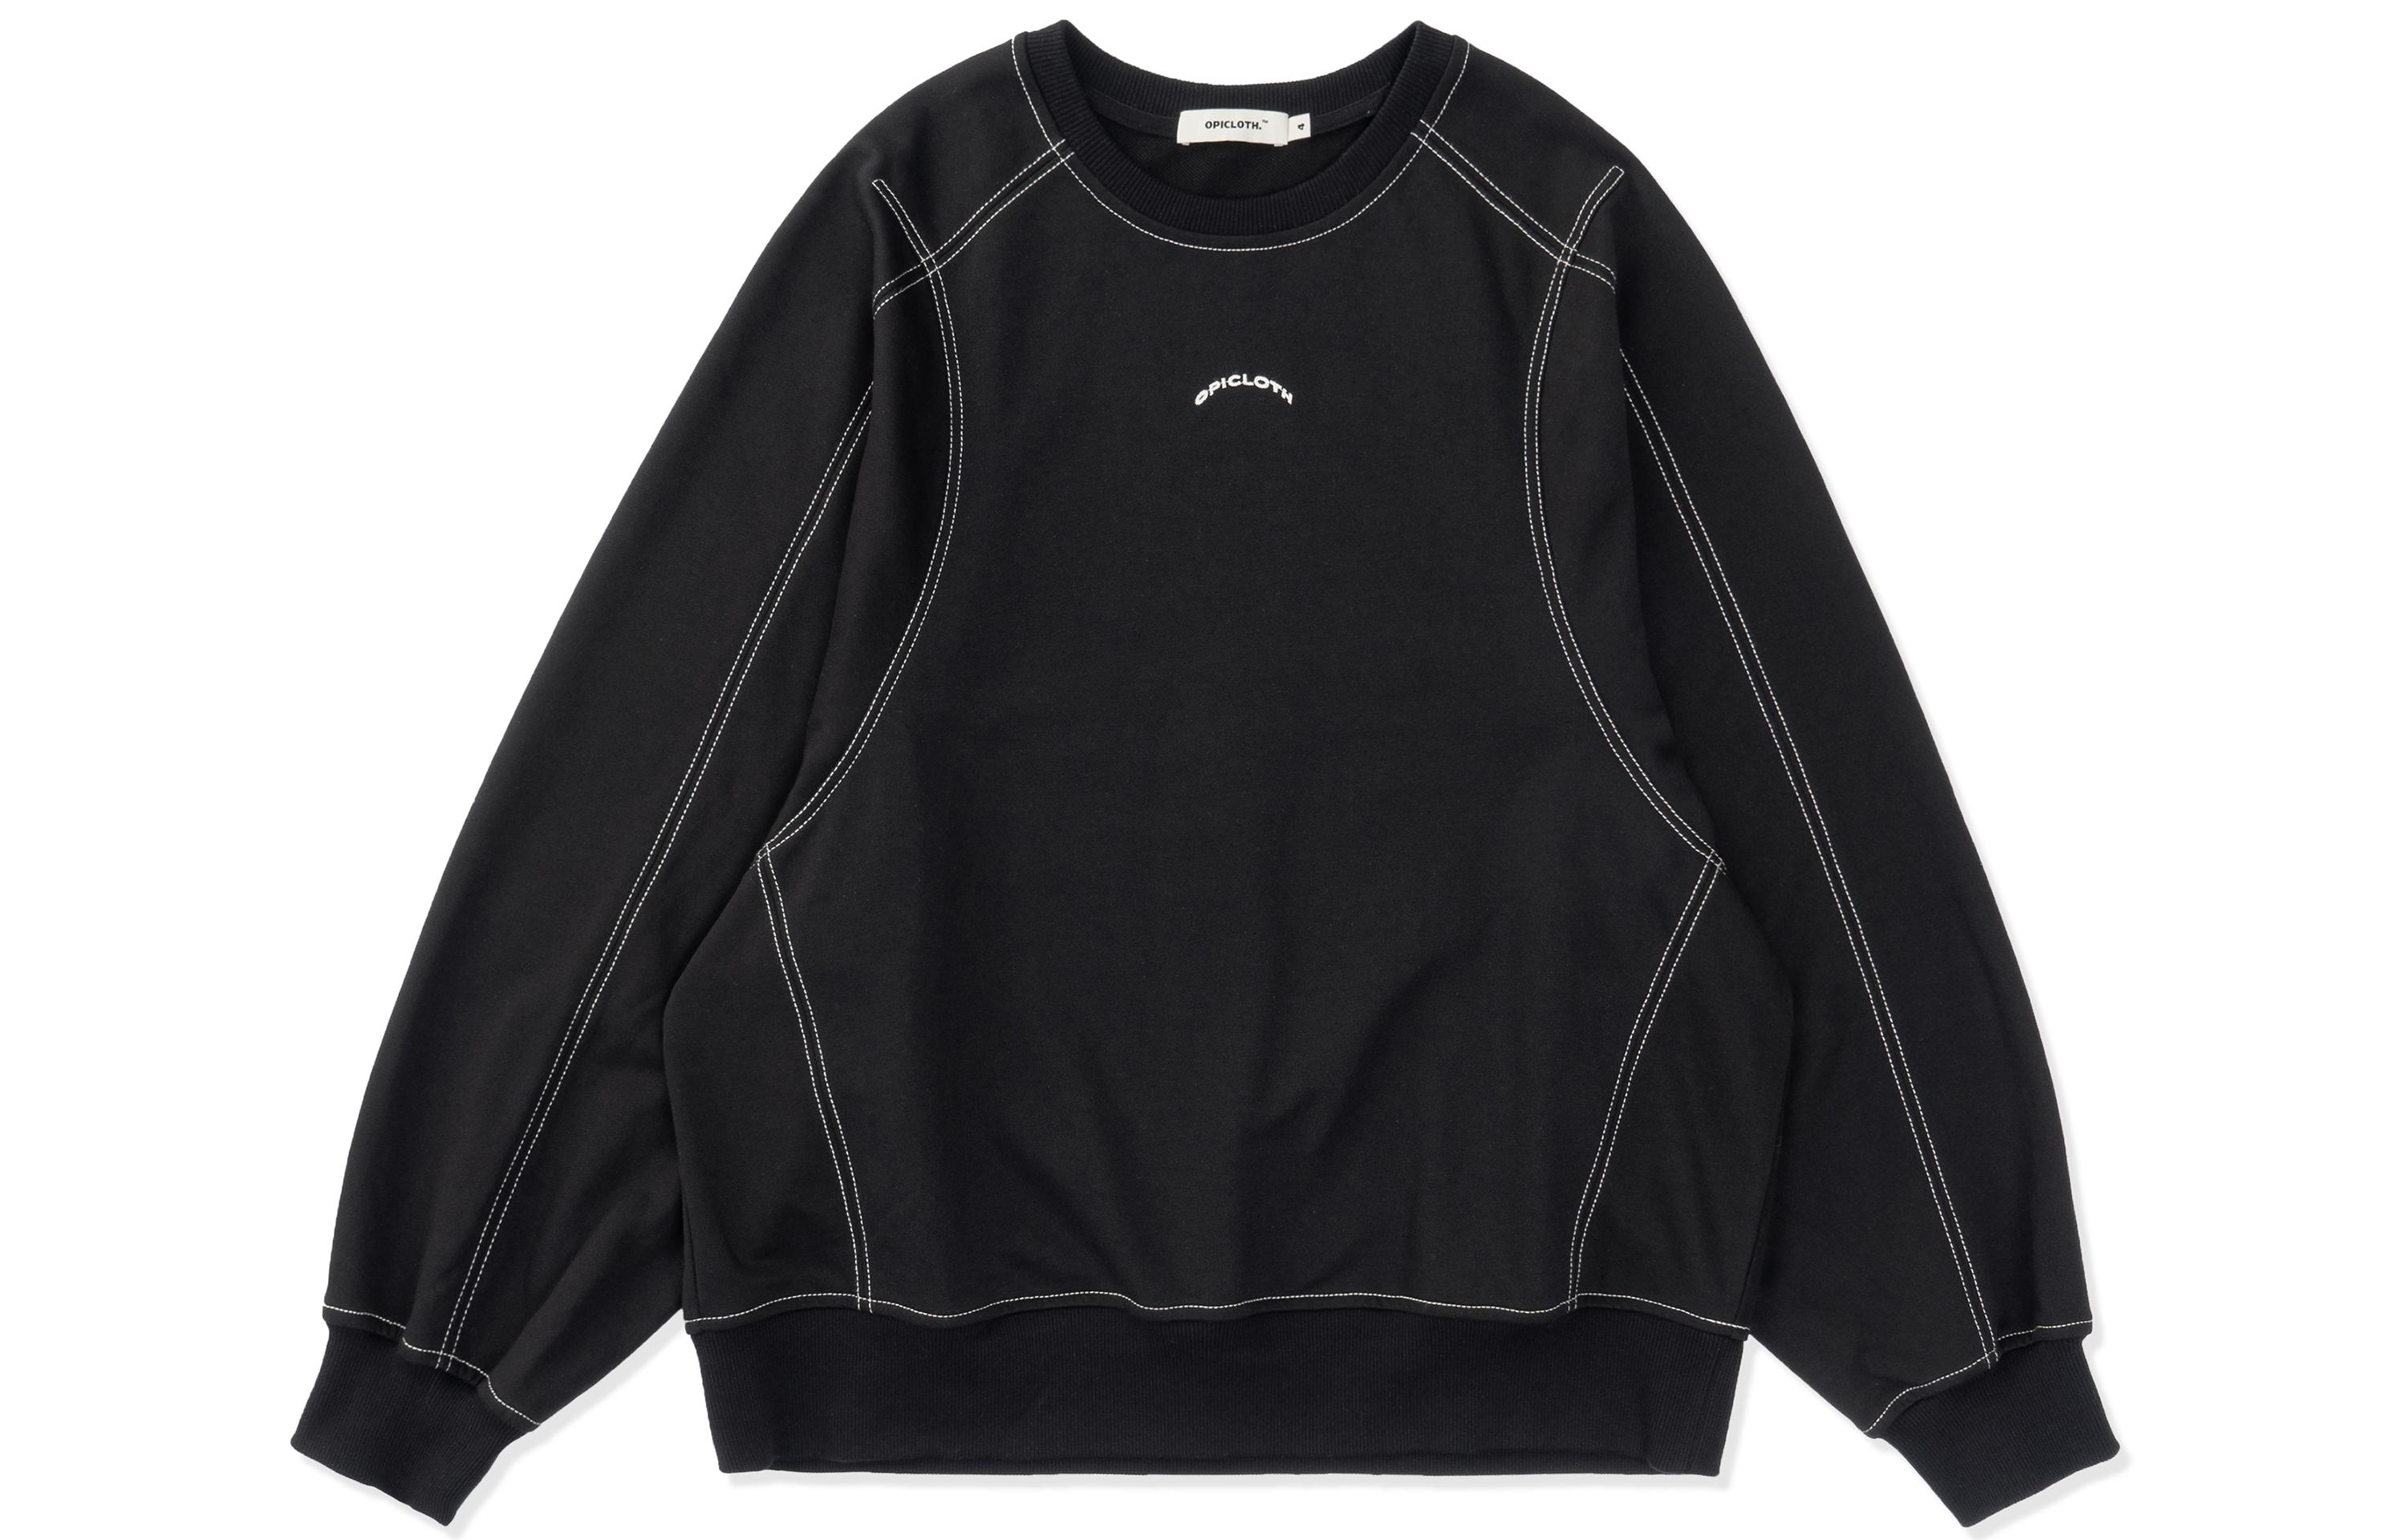 OPICLOTH FW21